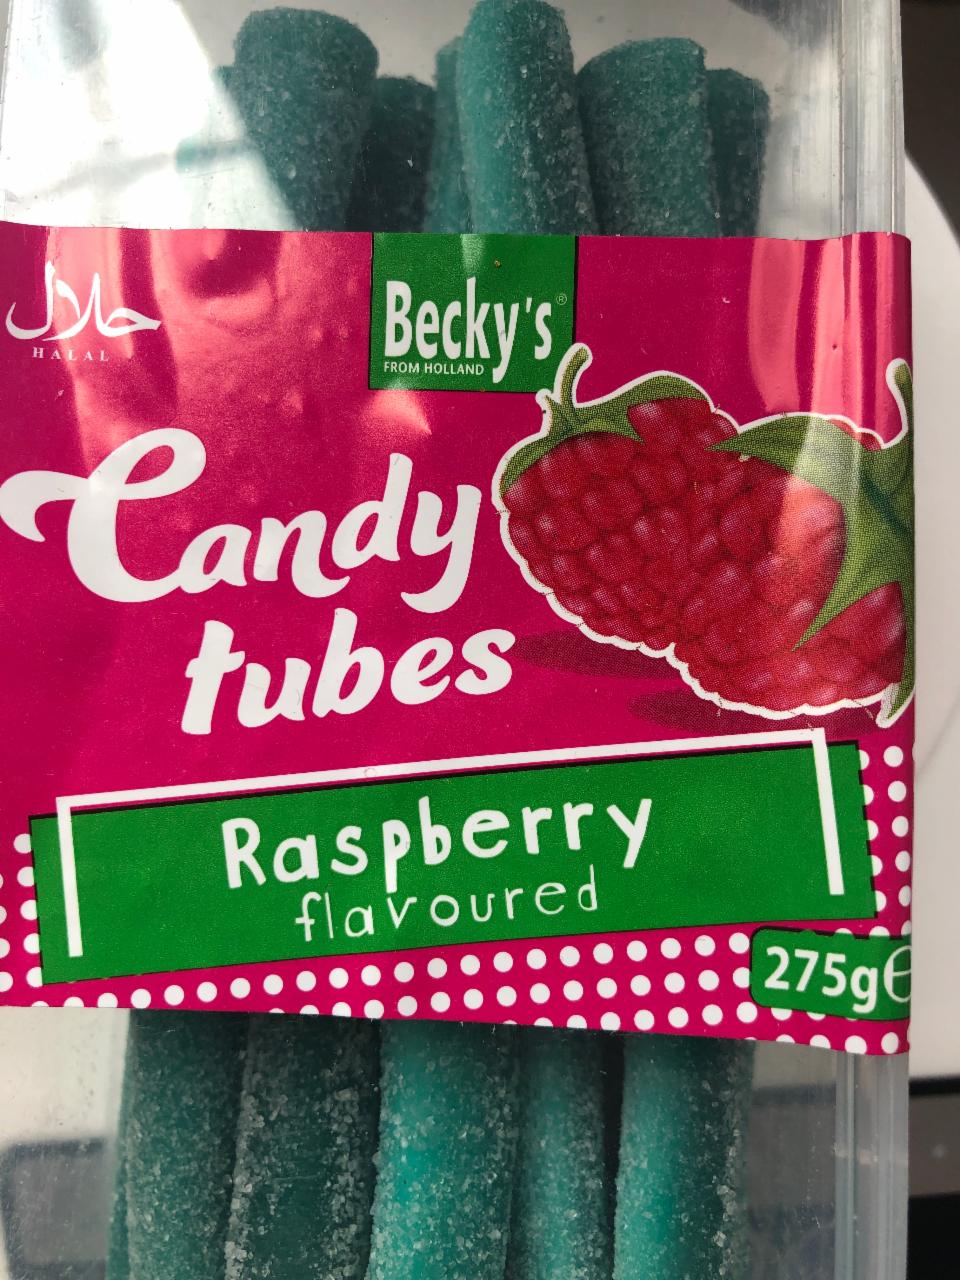 Фото - Candy tubes raspberry flavoured Becky's